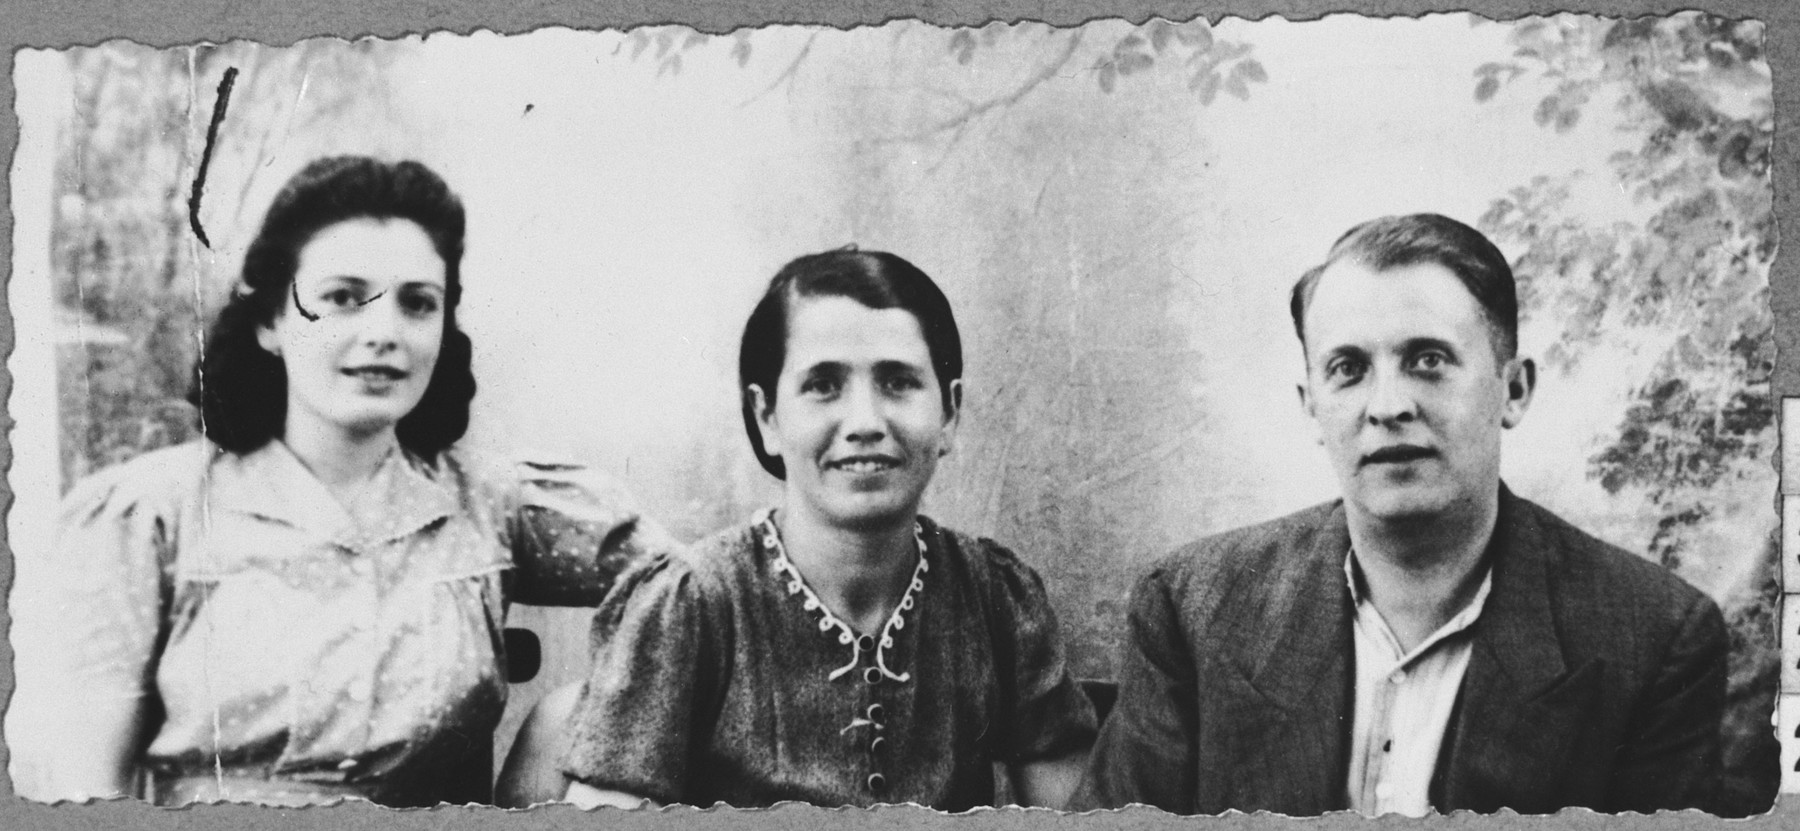 Portrait of Lazar Ischach, son of Yosef Ischach, his wife Sara, and his daughter Alegra.  Lazar was a grocer and Alegra, a student.  They lived at Drinksa 77 in Bitola.